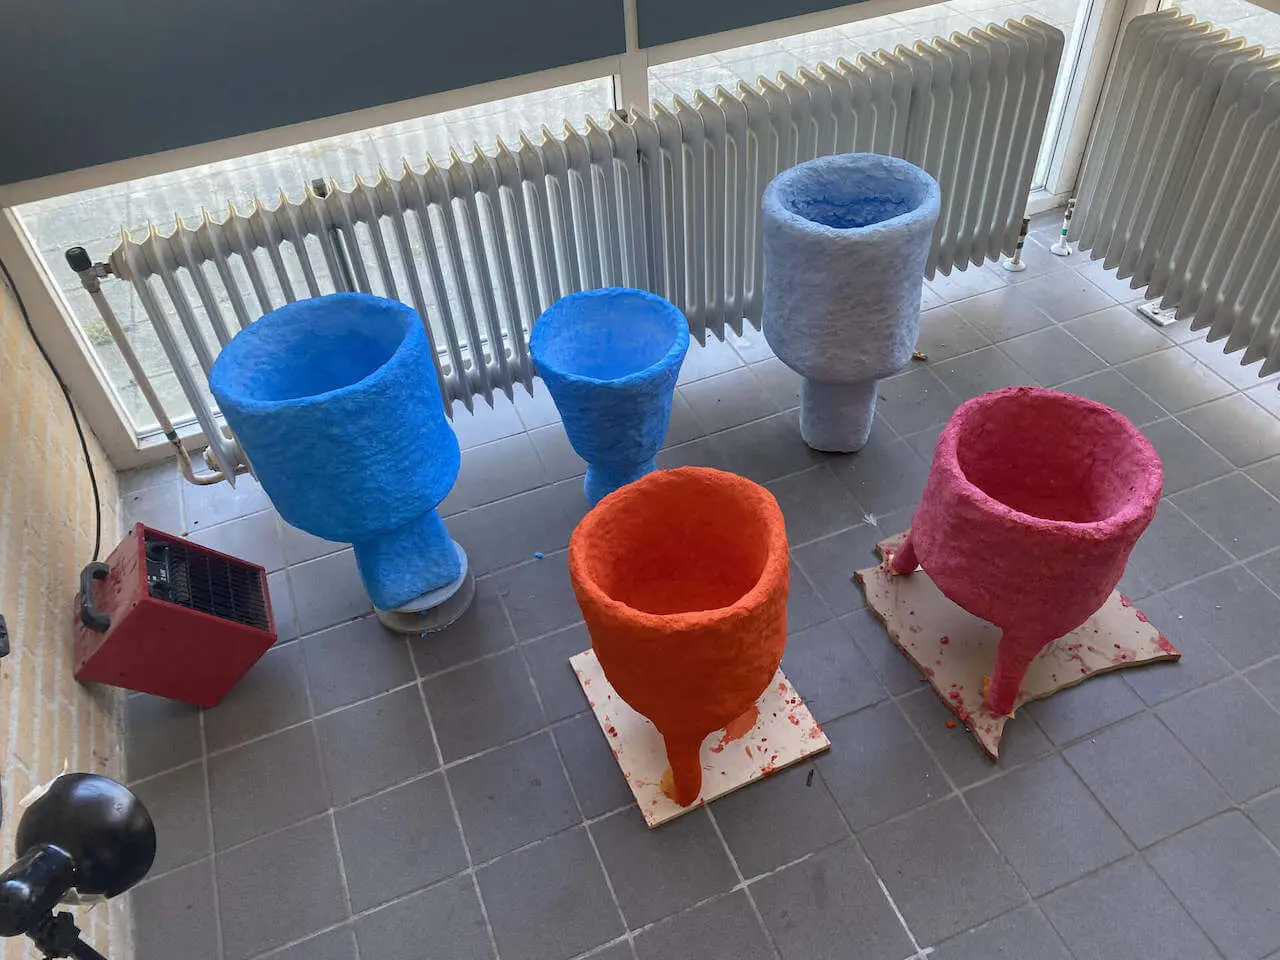 Teun Zwets - Pulp planters in colors